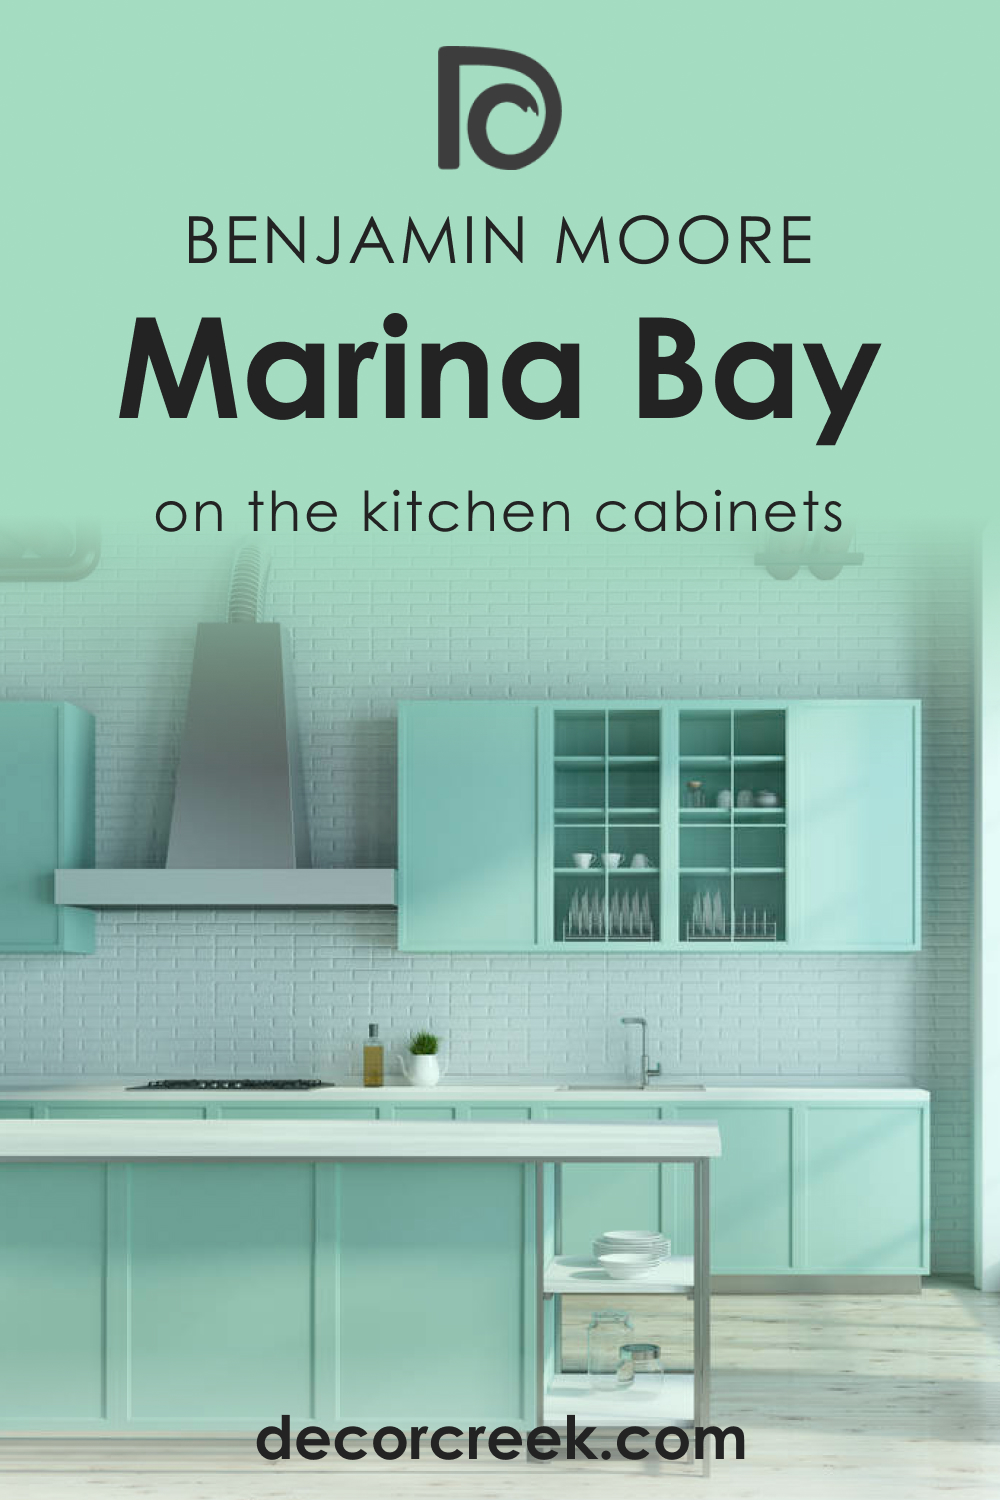 How to Use Marina Bay 2036-50 on the Kitchen Cabinets?